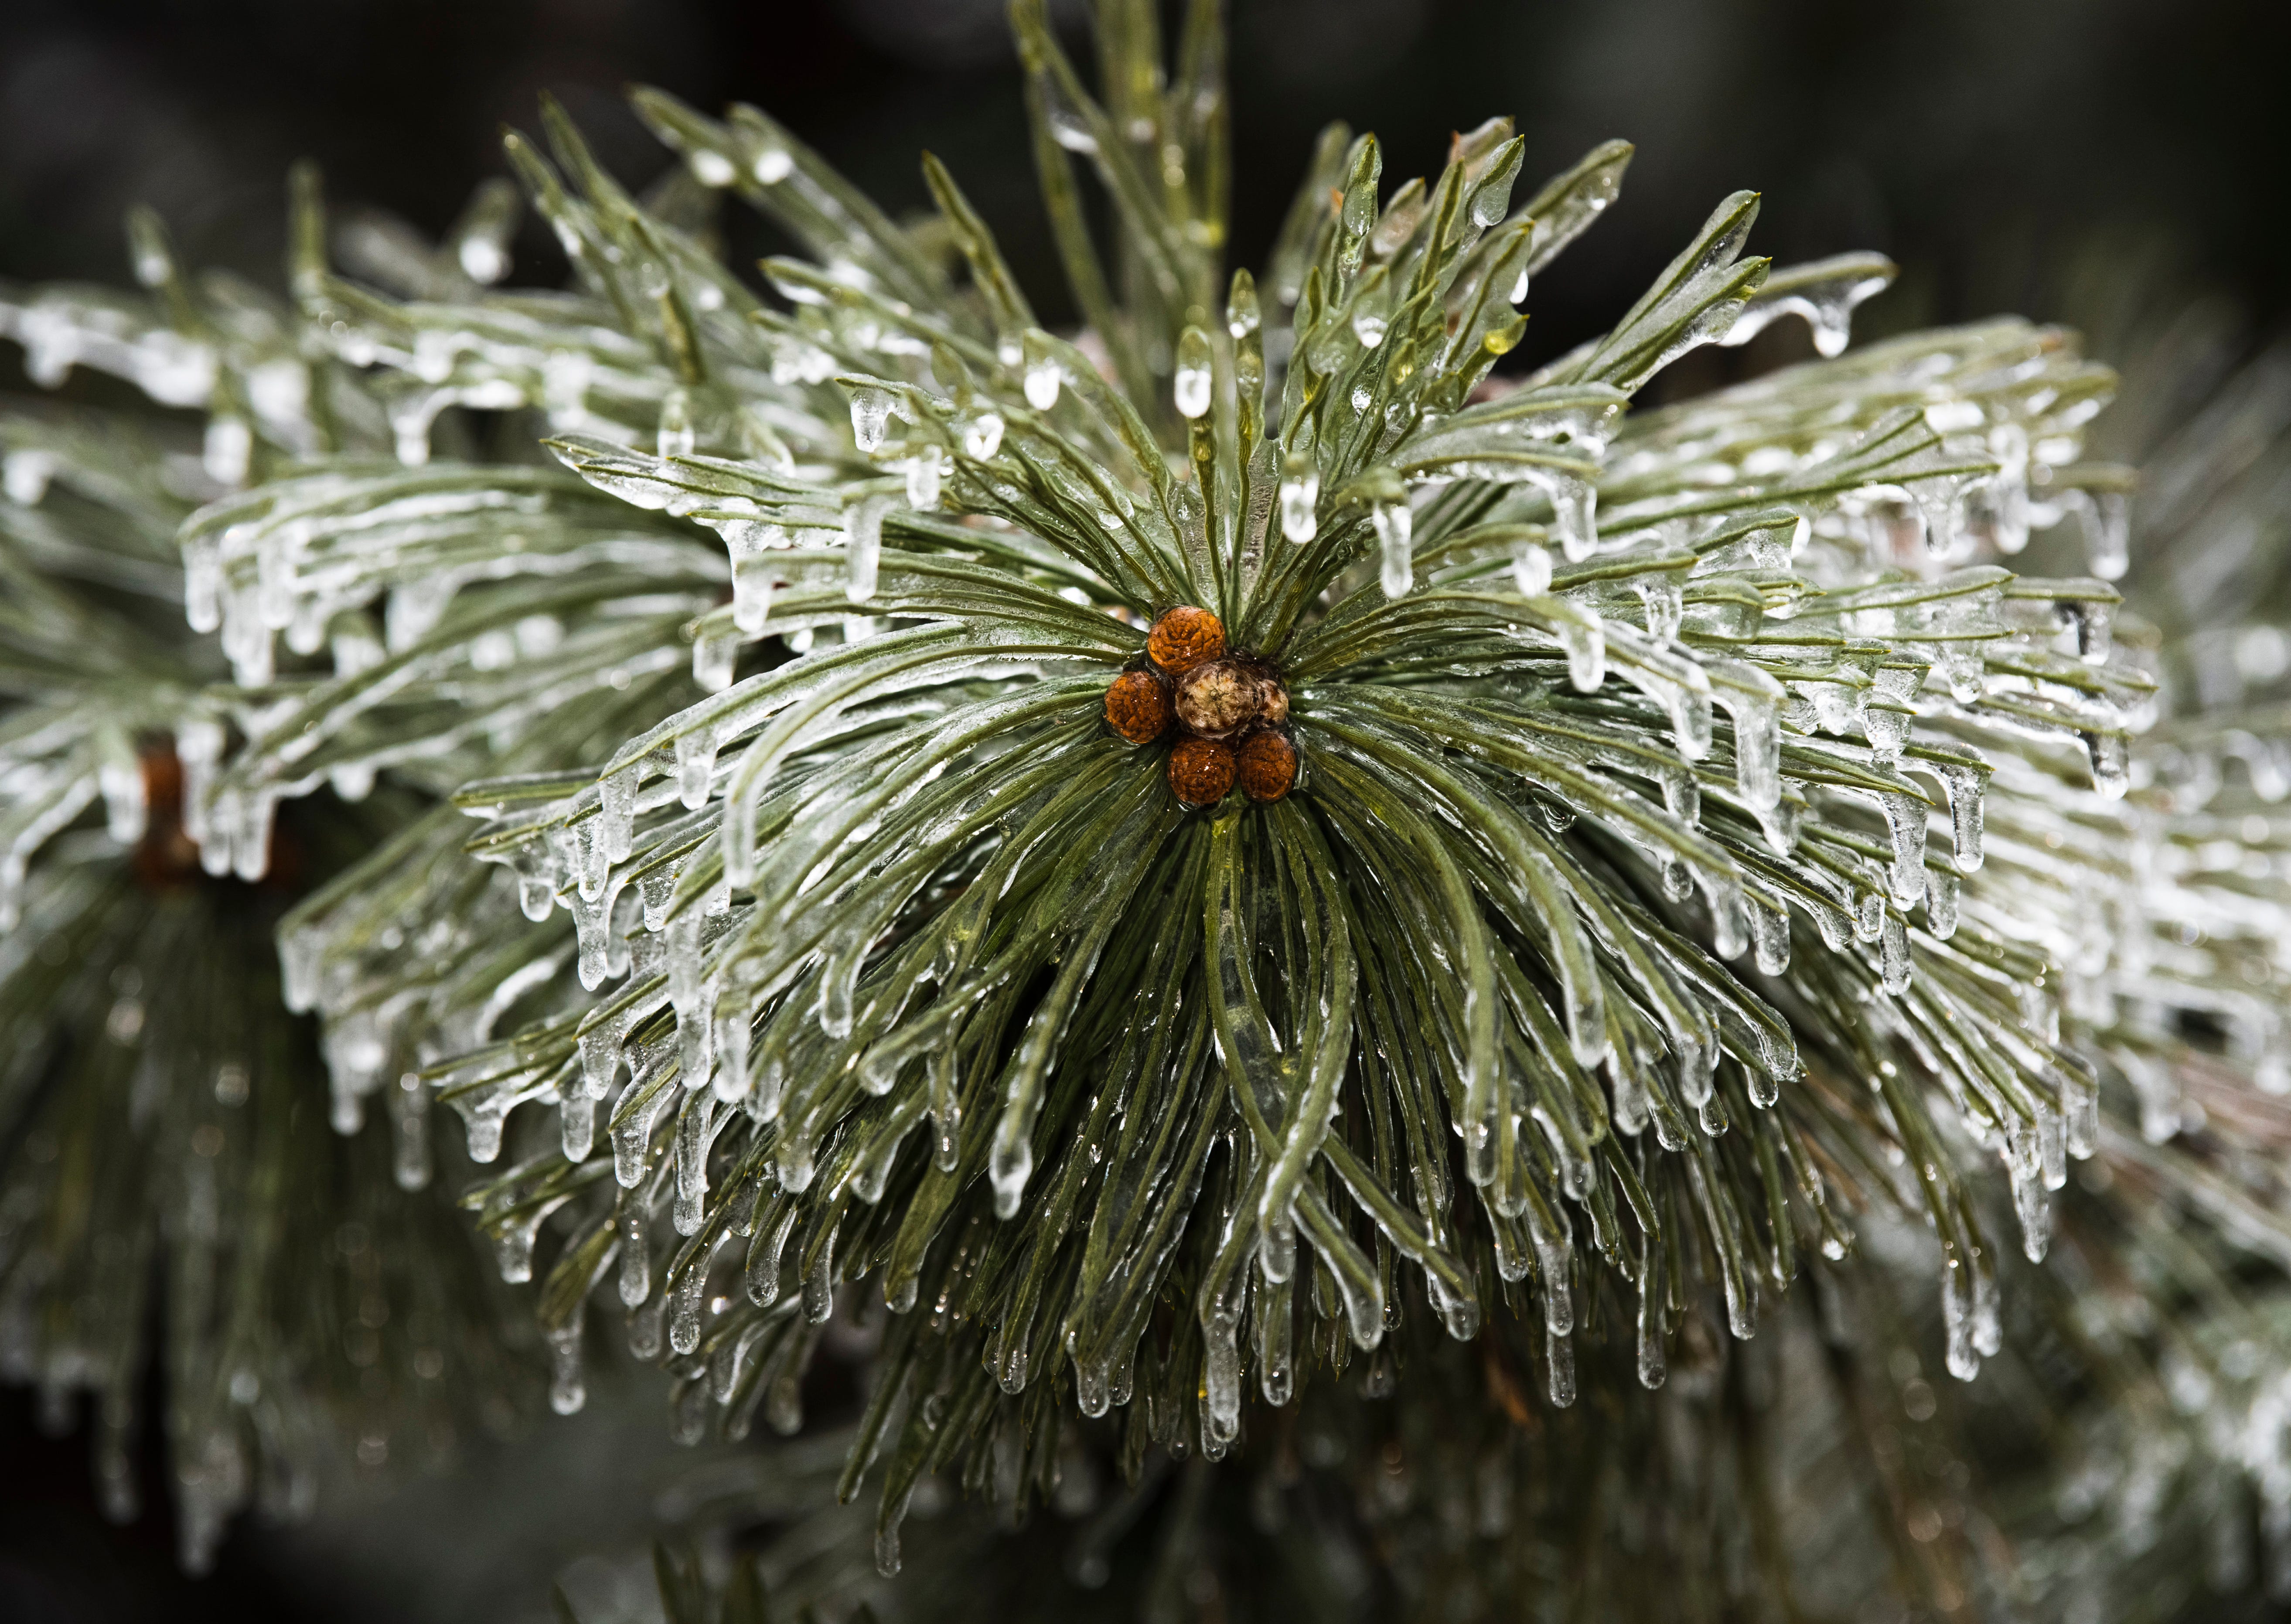 Ice clings to the needles of an evergreen tree in Grosse Pointe Woods on the morning of Thursday, February 23, 2023 after freezing rain coated Metro Detroit communities over night.